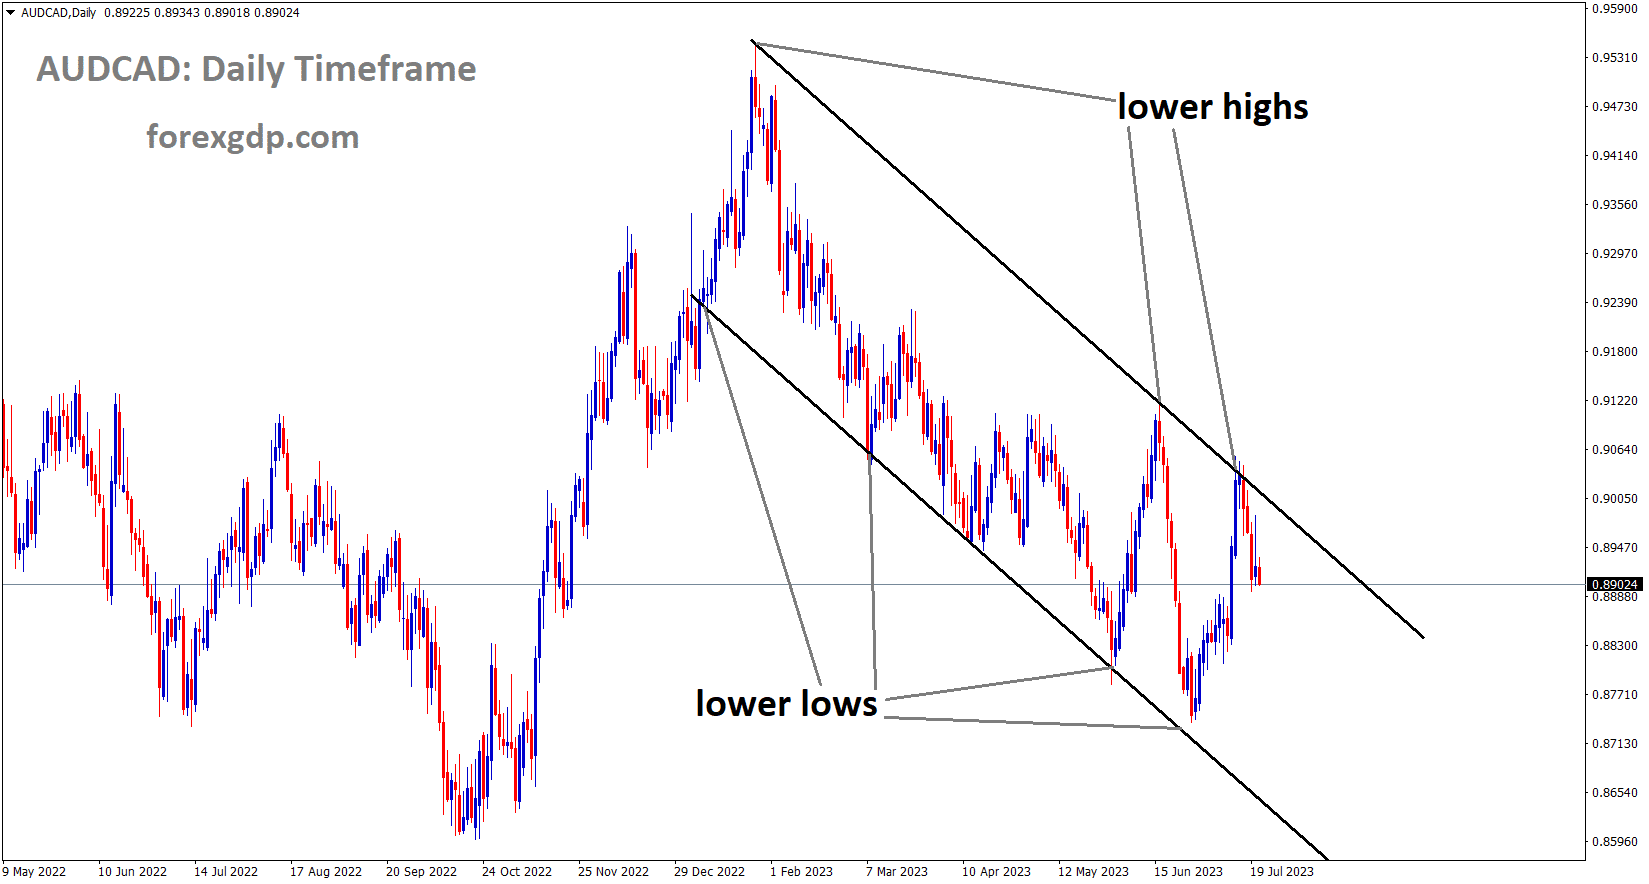 AUDCAD is moving in the Descending channel and the market has fallen from the lower high area of the channel